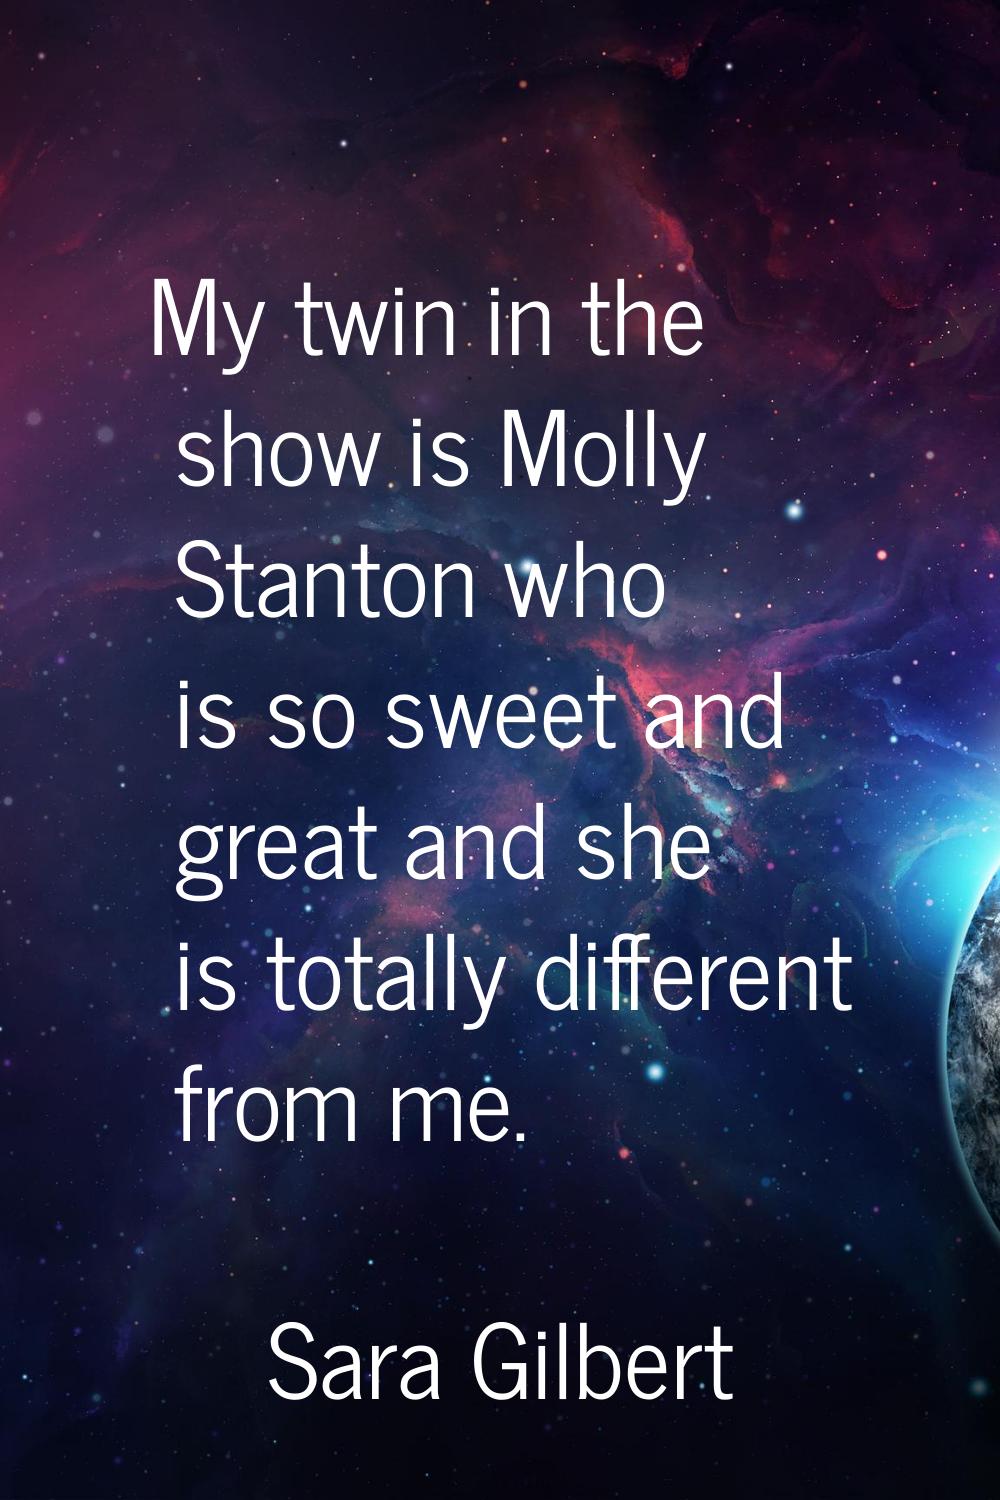 My twin in the show is Molly Stanton who is so sweet and great and she is totally different from me